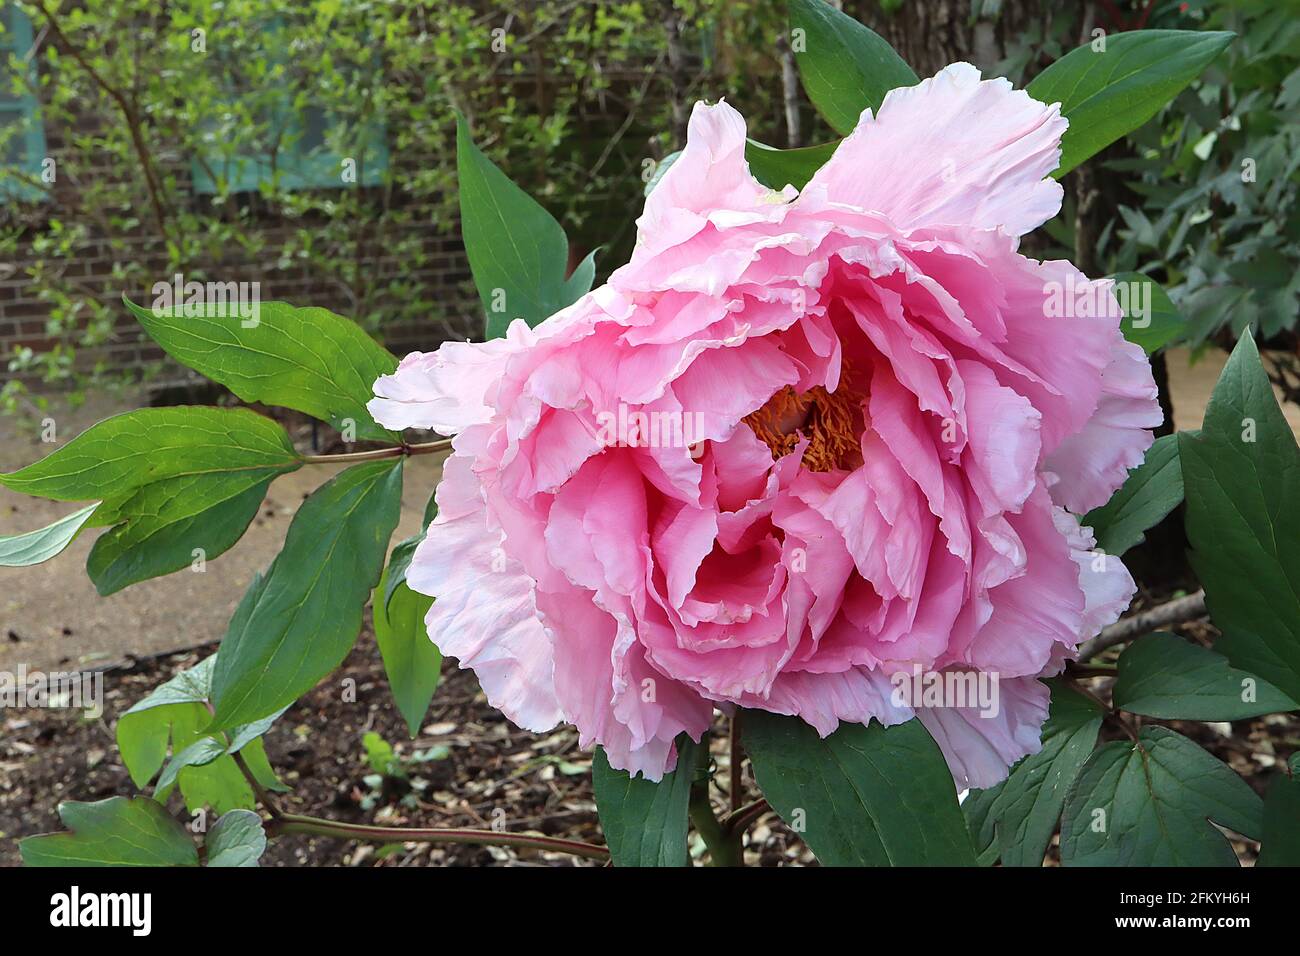 Paeonia lactiflora ‘Sarah Bernhardt’ Peony Sarah Bernhardt – enormous rose pink double flowers and large divided leaves,  May, England, UK Stock Photo